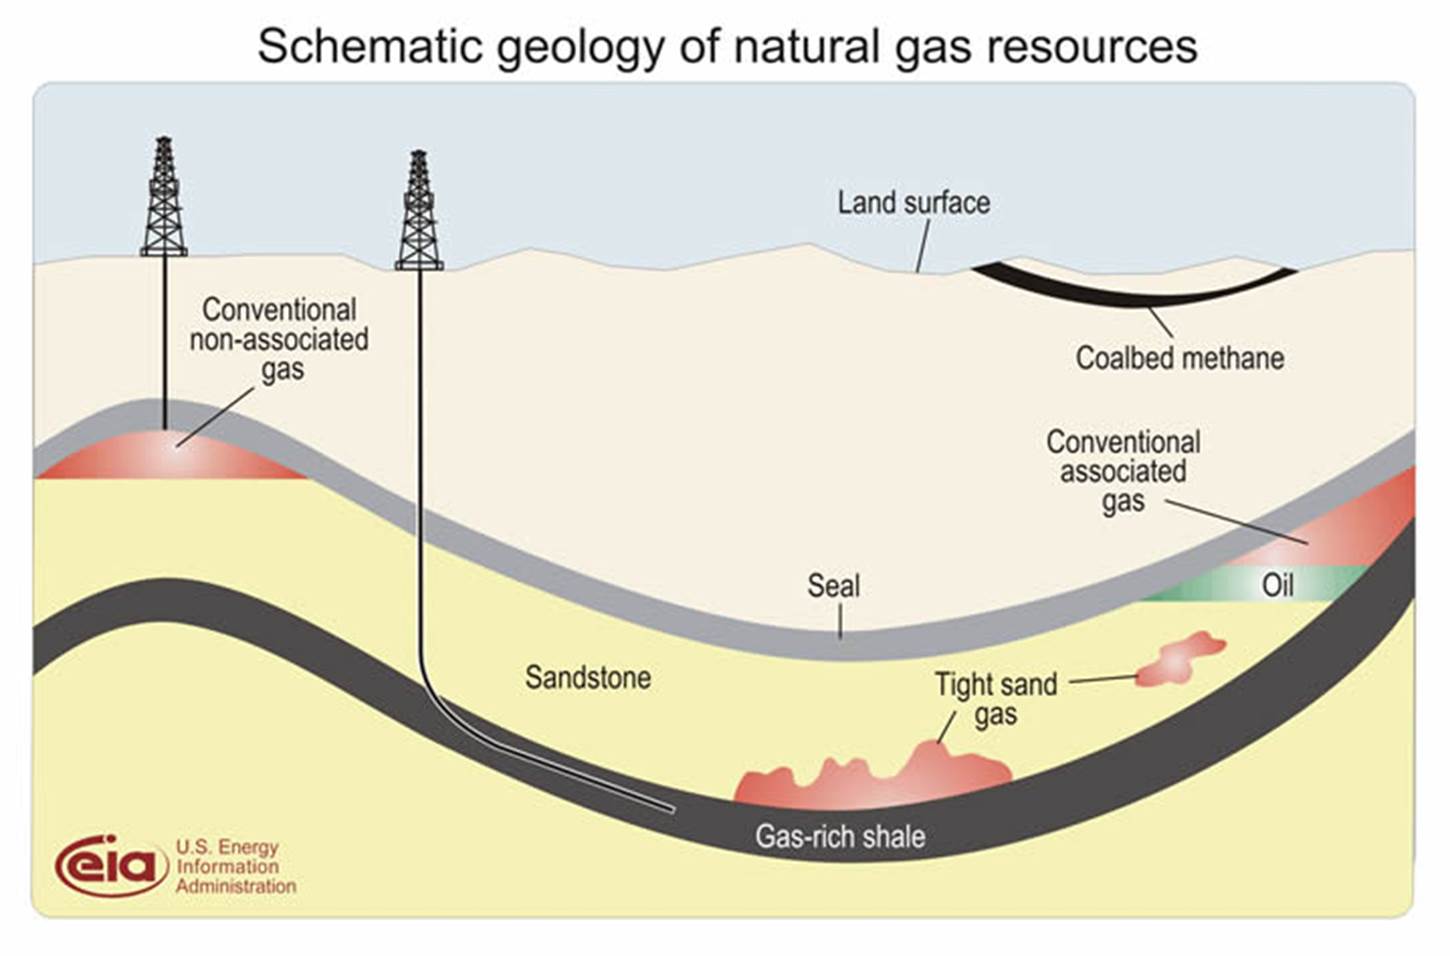 The geologic nature of most major sources of natural gas.  Image retrieved from: http://www.eia.gov/oil_gas/natural_gas/special/ngresources/ngresources.html, last accessed 4/25/16.